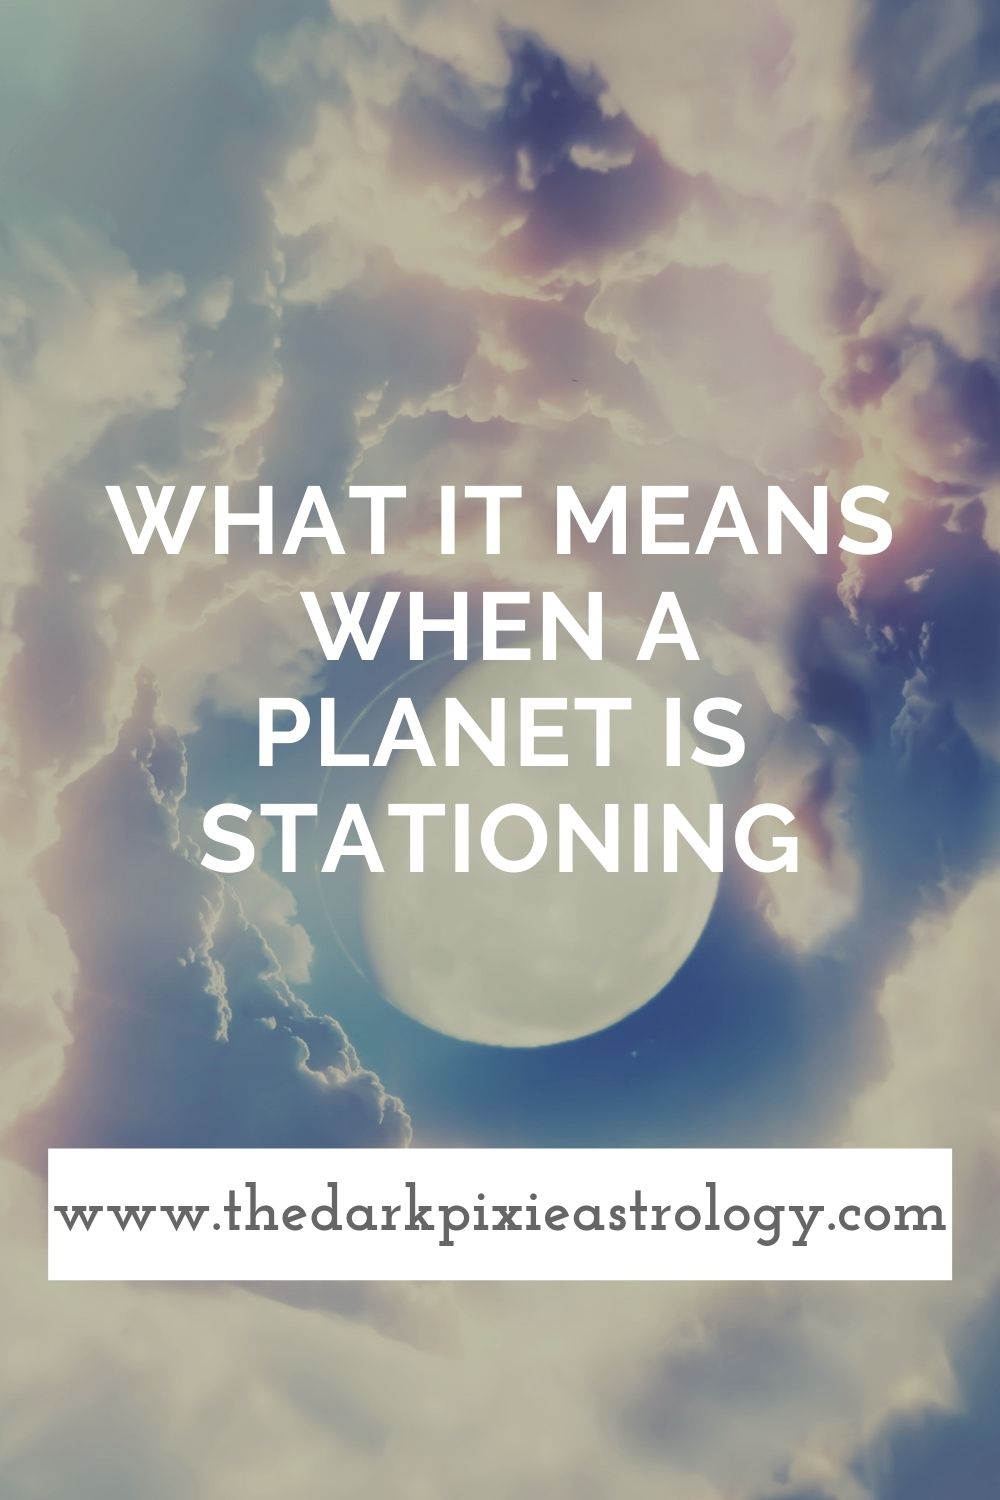 What It Means When a Planet is Stationing - The Dark Pixie Astrology